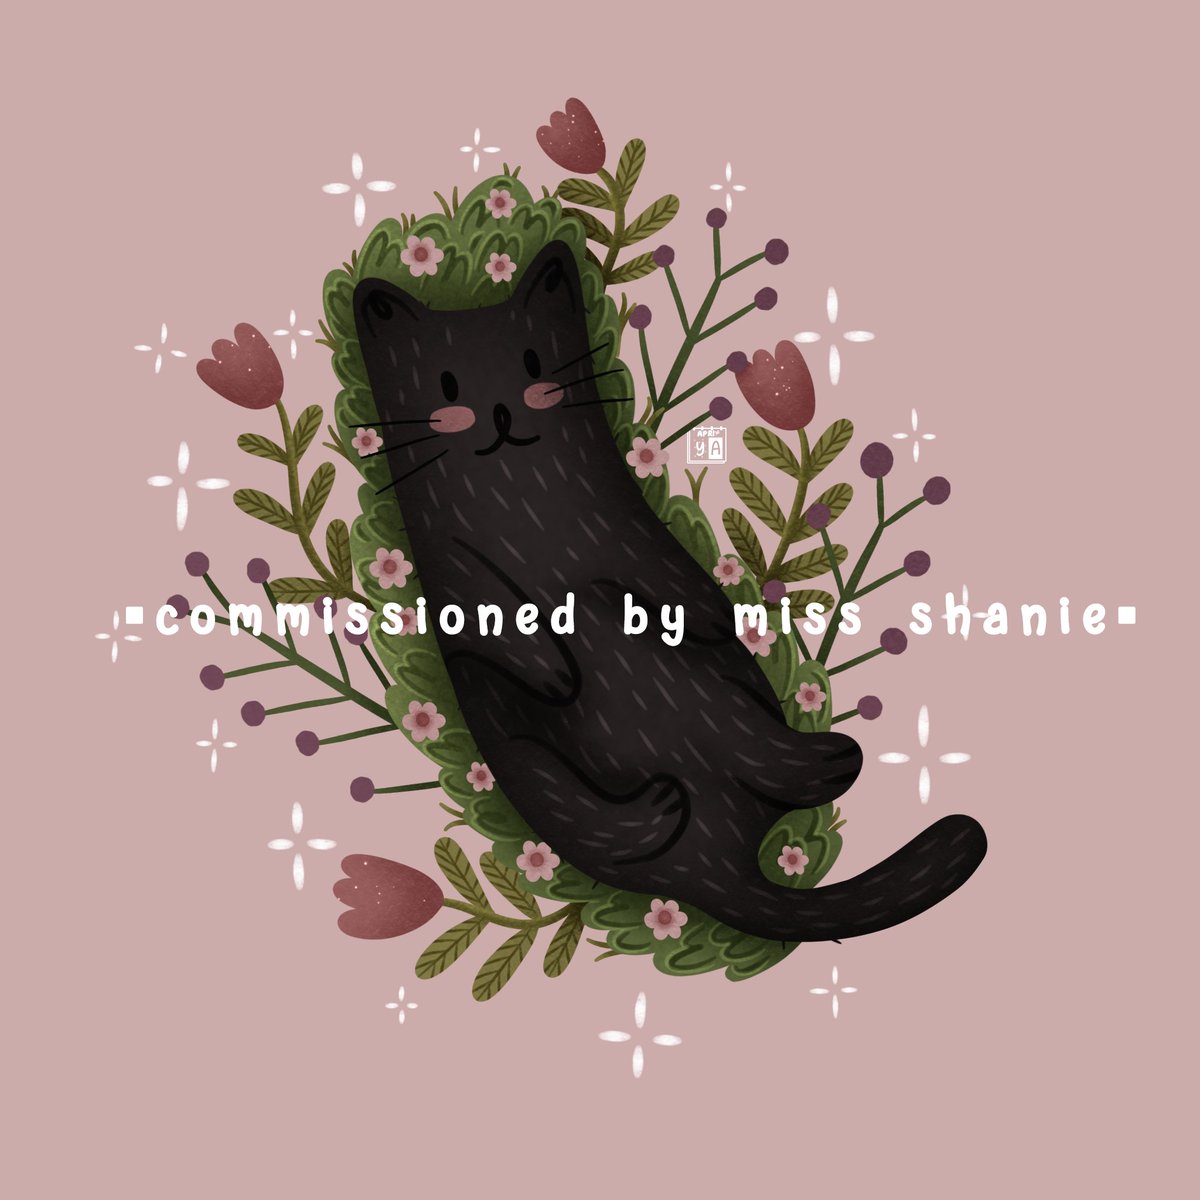 Let's be Artmoots?💐😊

✨️✨️✨️✨️ARTMOOTS✨️✨️✨️✨️

Btw this artwork is commissioned by Miss Shanie, its for her cute furbaby Sachi.♡

Commissions Open!

#apriyaarts #digitalillustration #customillustrationph #petillustration #furbaby #catlover #artmoots